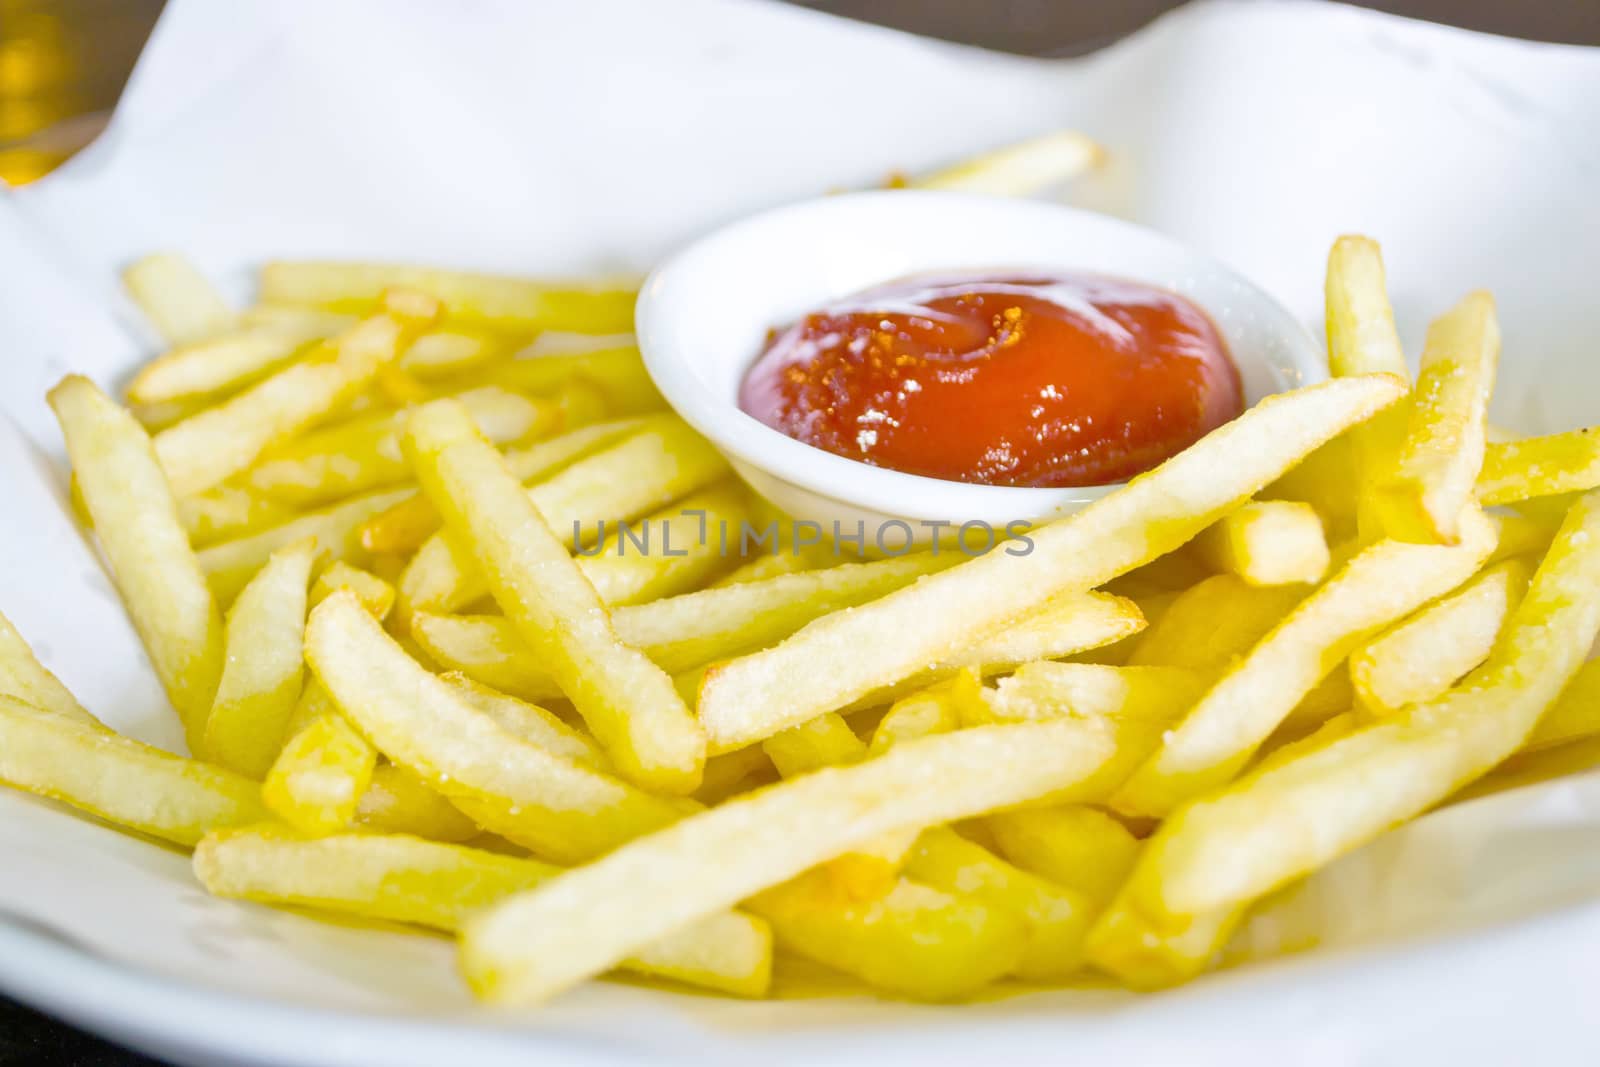 French fries and ketchup on the plate